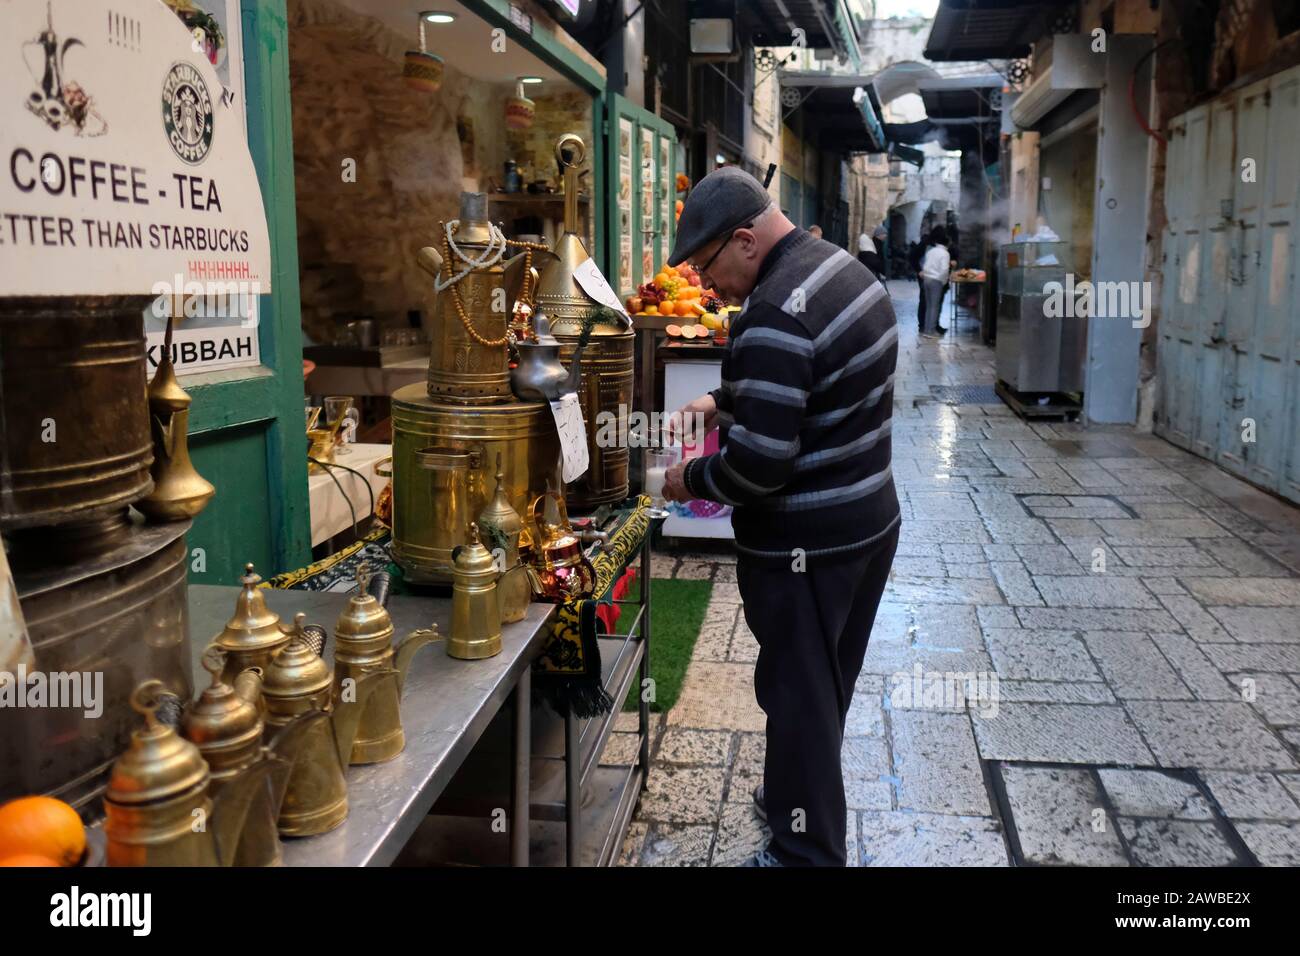 Palestinian man pouring hot Salep, also spelled sahlep or sahlabon in El Wad also called Hagai Street in the old city of Jerusalem. Israel Stock Photo